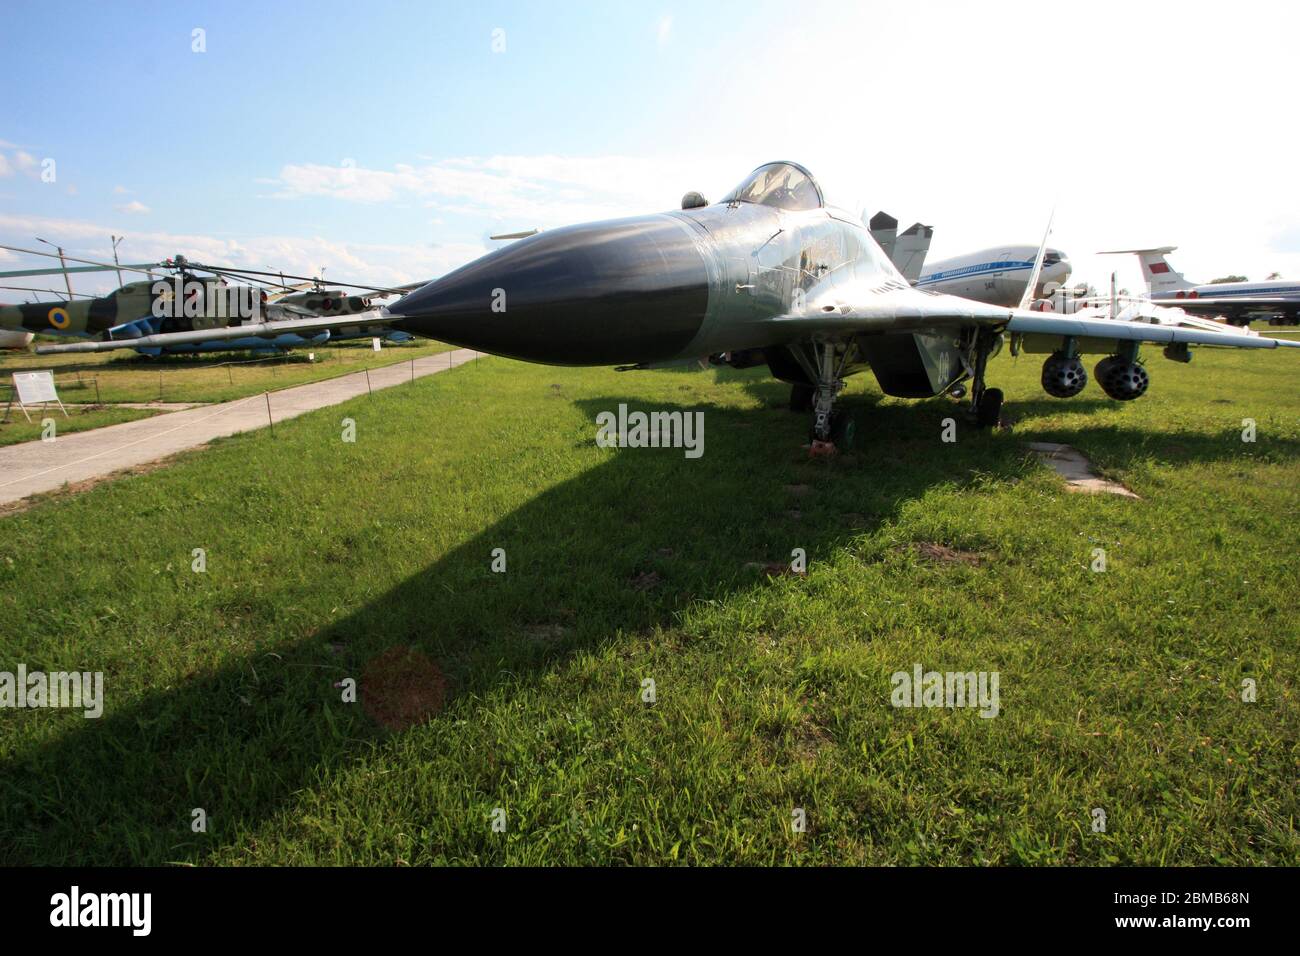 Front view of a Mikoyan MiG-29 'Fulcrum'  twin-engine air superiority jet fighter at the Zhulyany State Aviation Museum of Ukraine Stock Photo